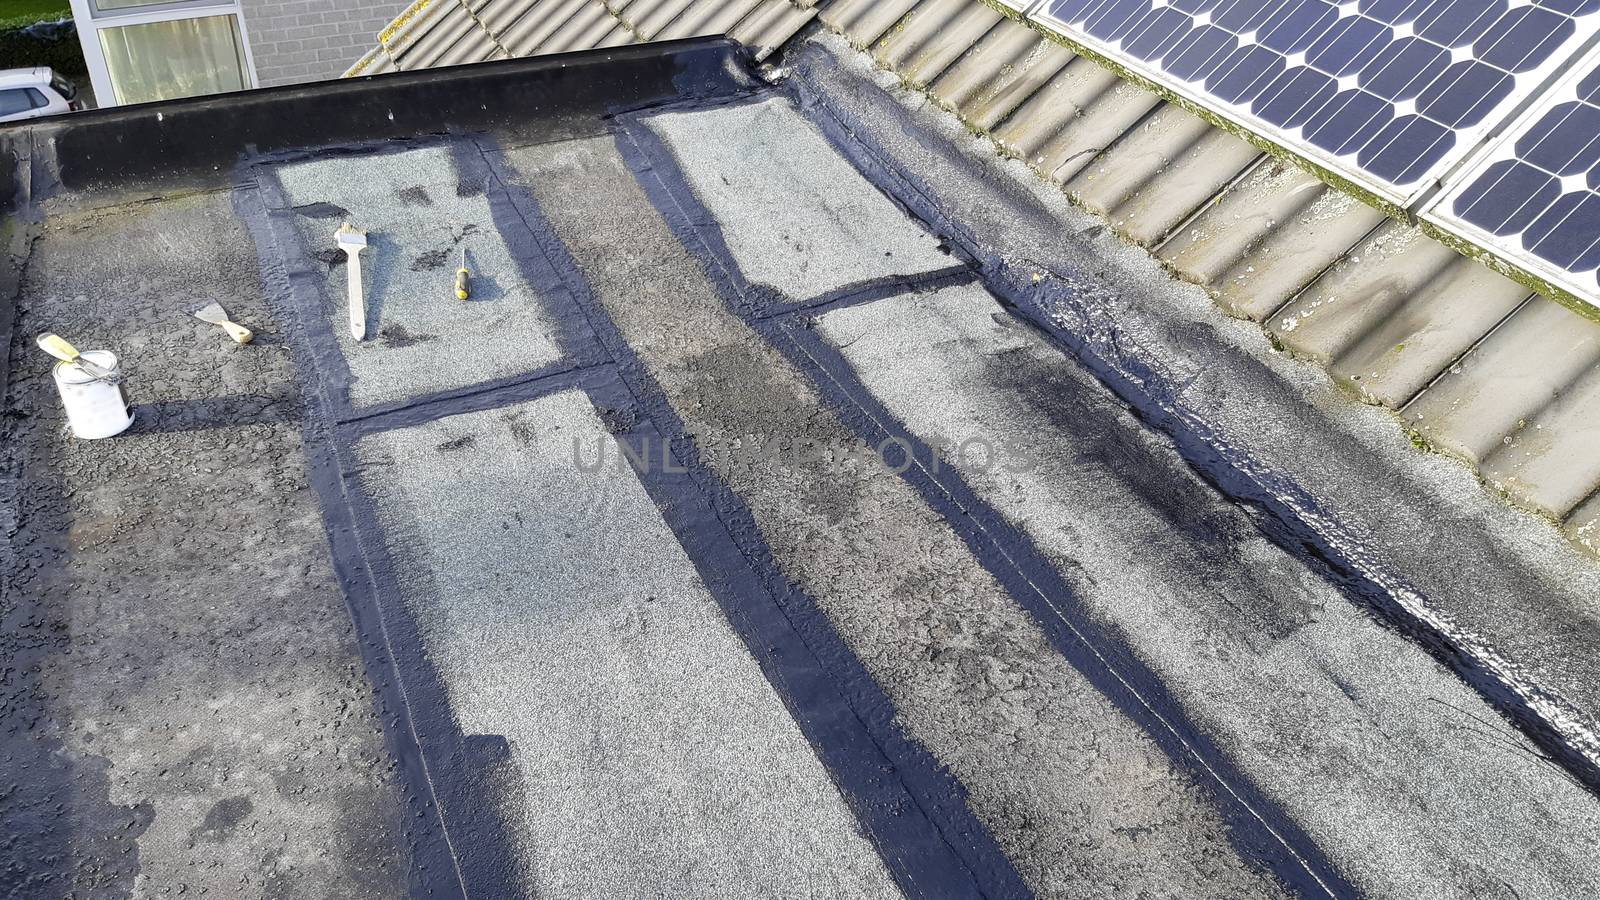 Tar foil roof repair: new patches installed to prevent further leaking from the roof. Emergency repair. by kb79